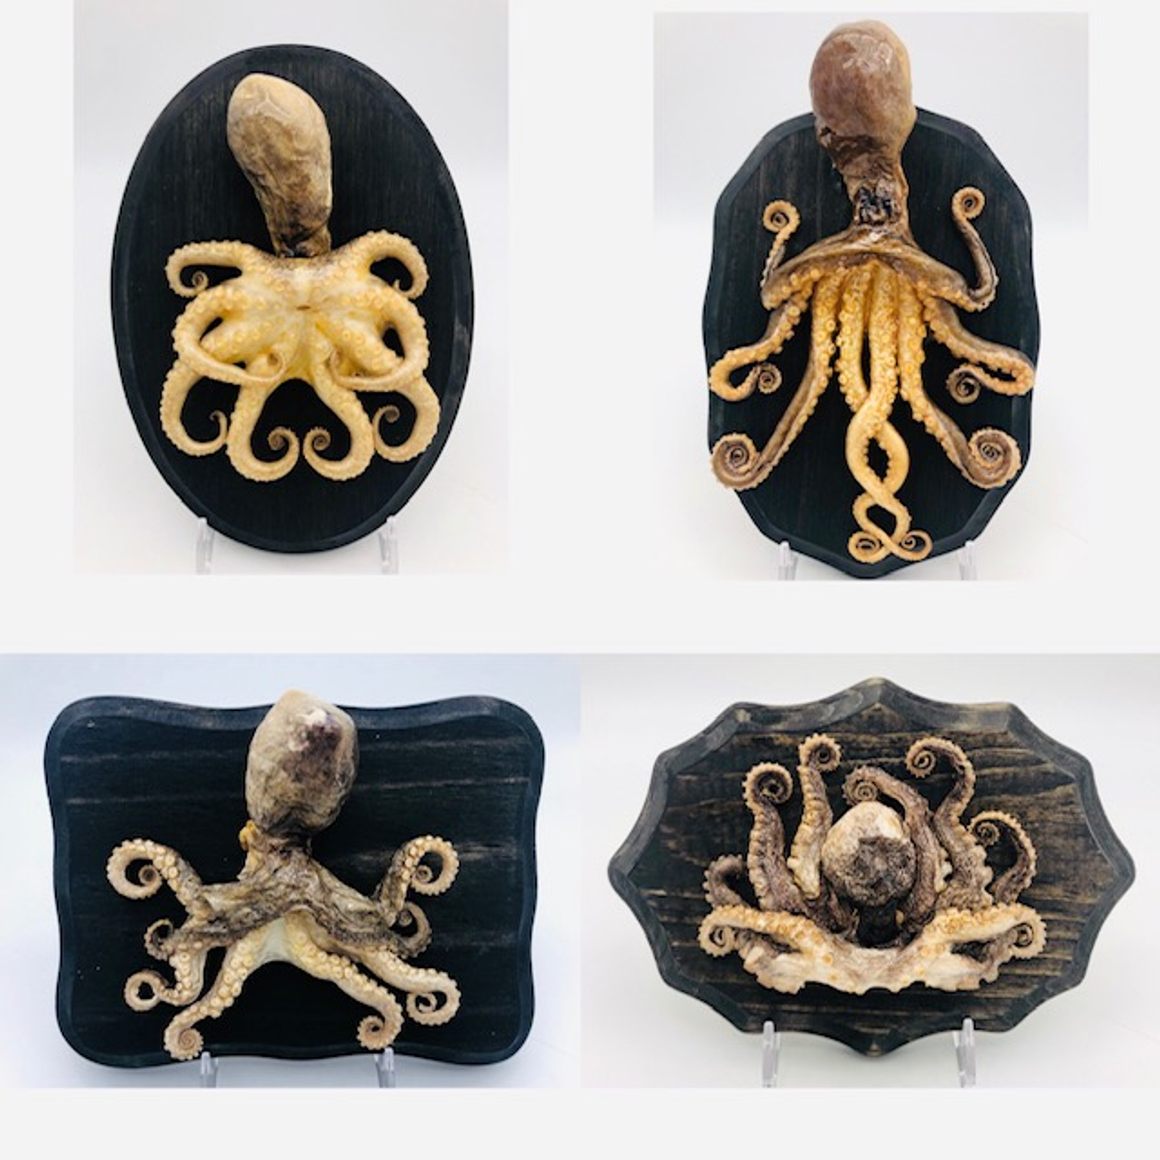 Samples of octopus taxidermy.